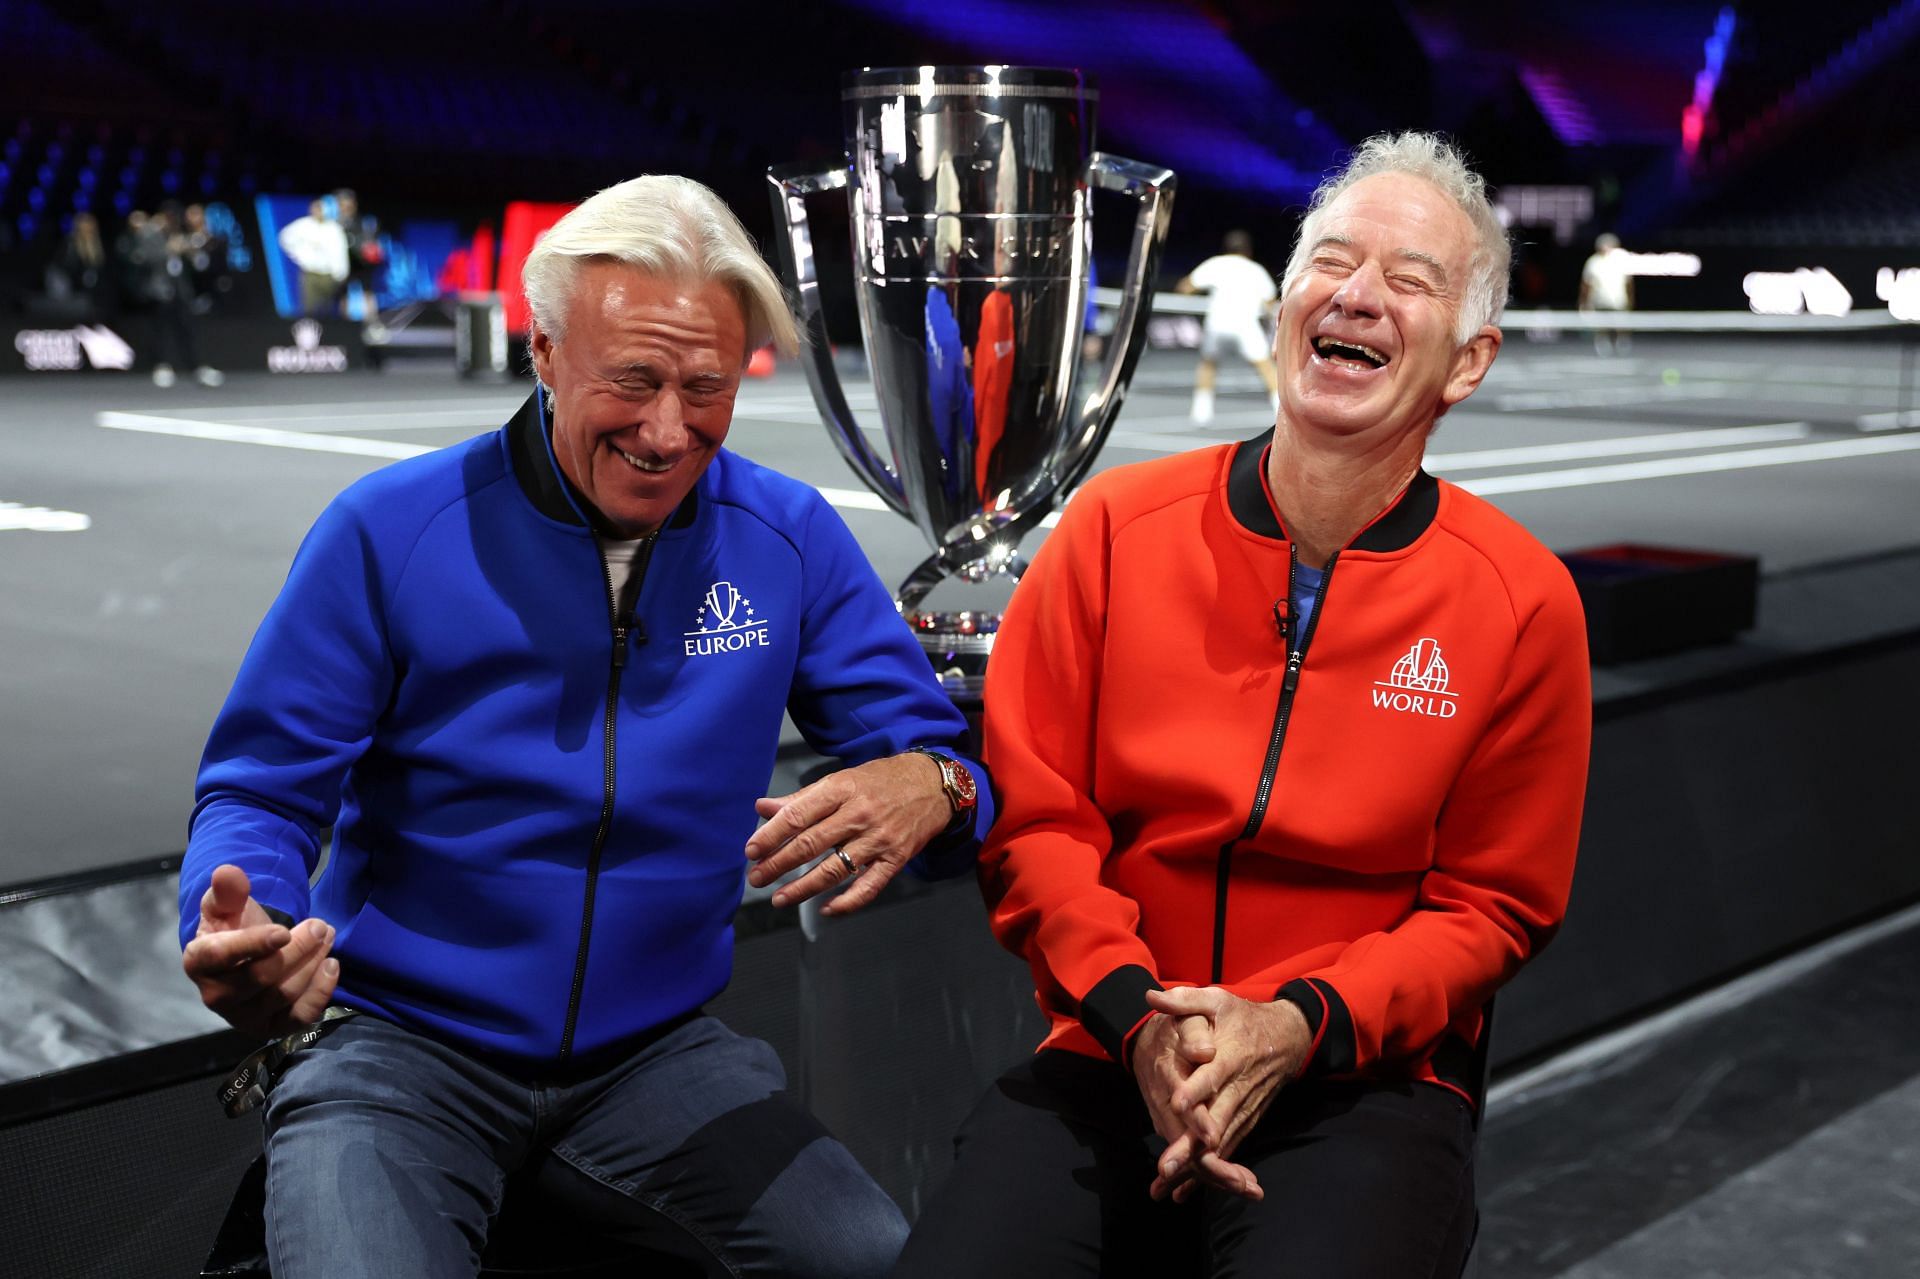 Bjorn Borg and John McEnroe at the Laver Cup 2022.